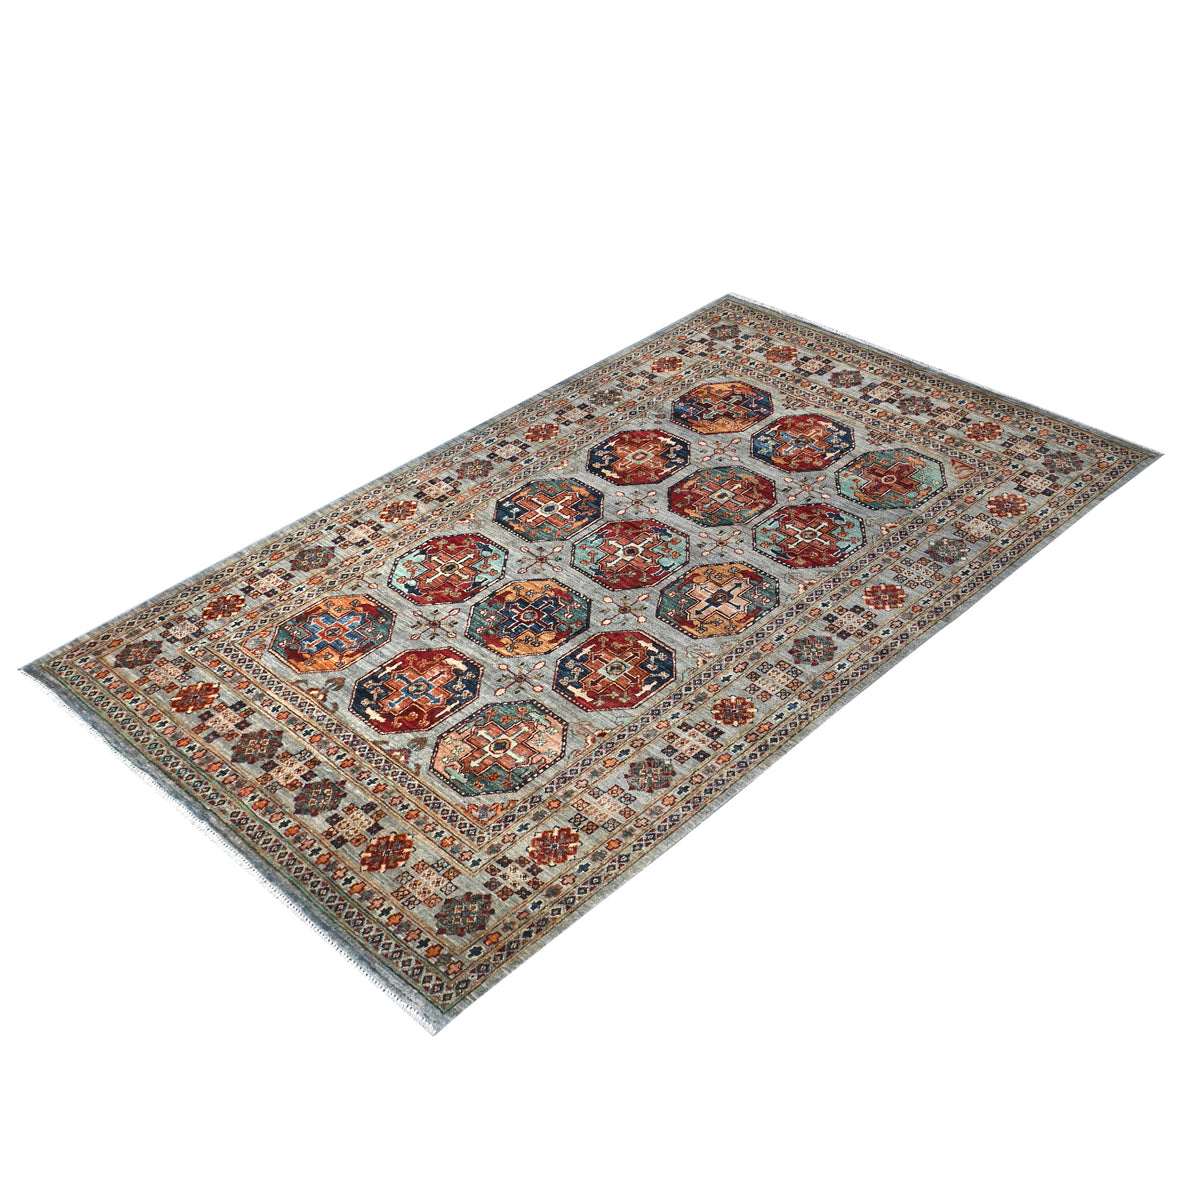 Fine Hand-knotted Wool Rug 157cm x 210cm